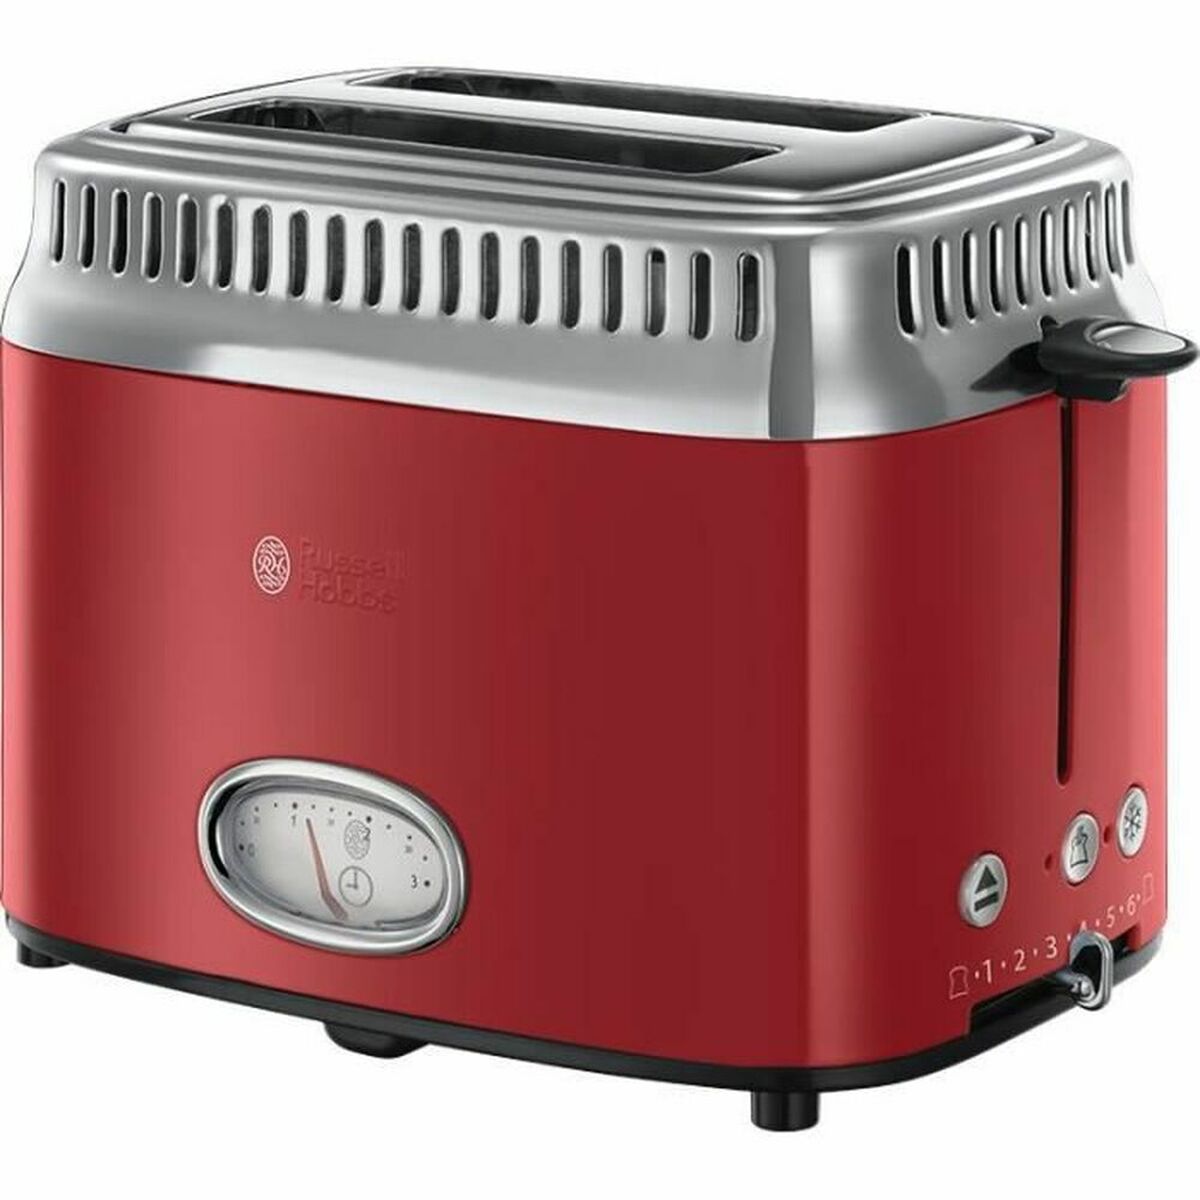 Tostapane Russell Hobbs 21680-56 Rosso 1300 W